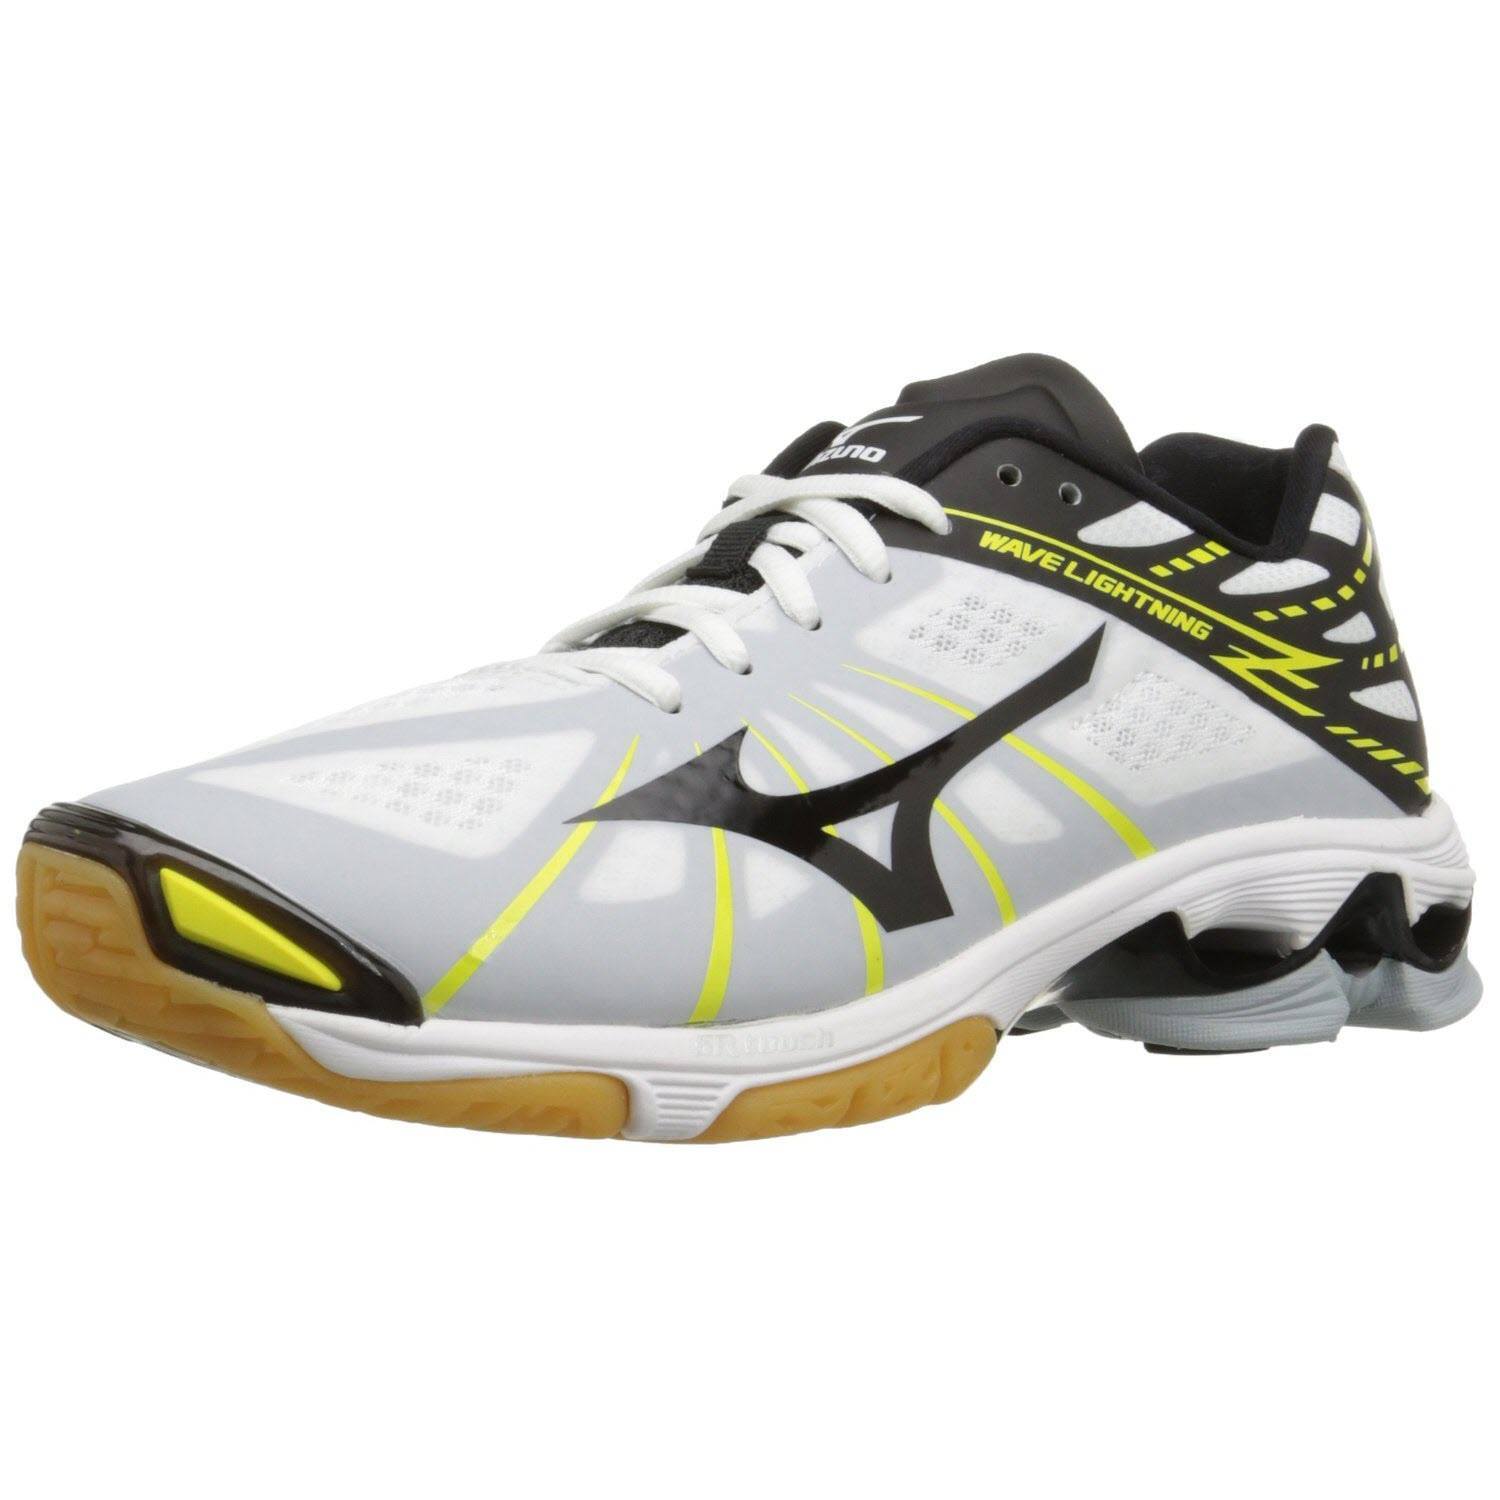 Mizuno Unisex Adults’ Wave Lightning Z6mid Volleyball Shoes 